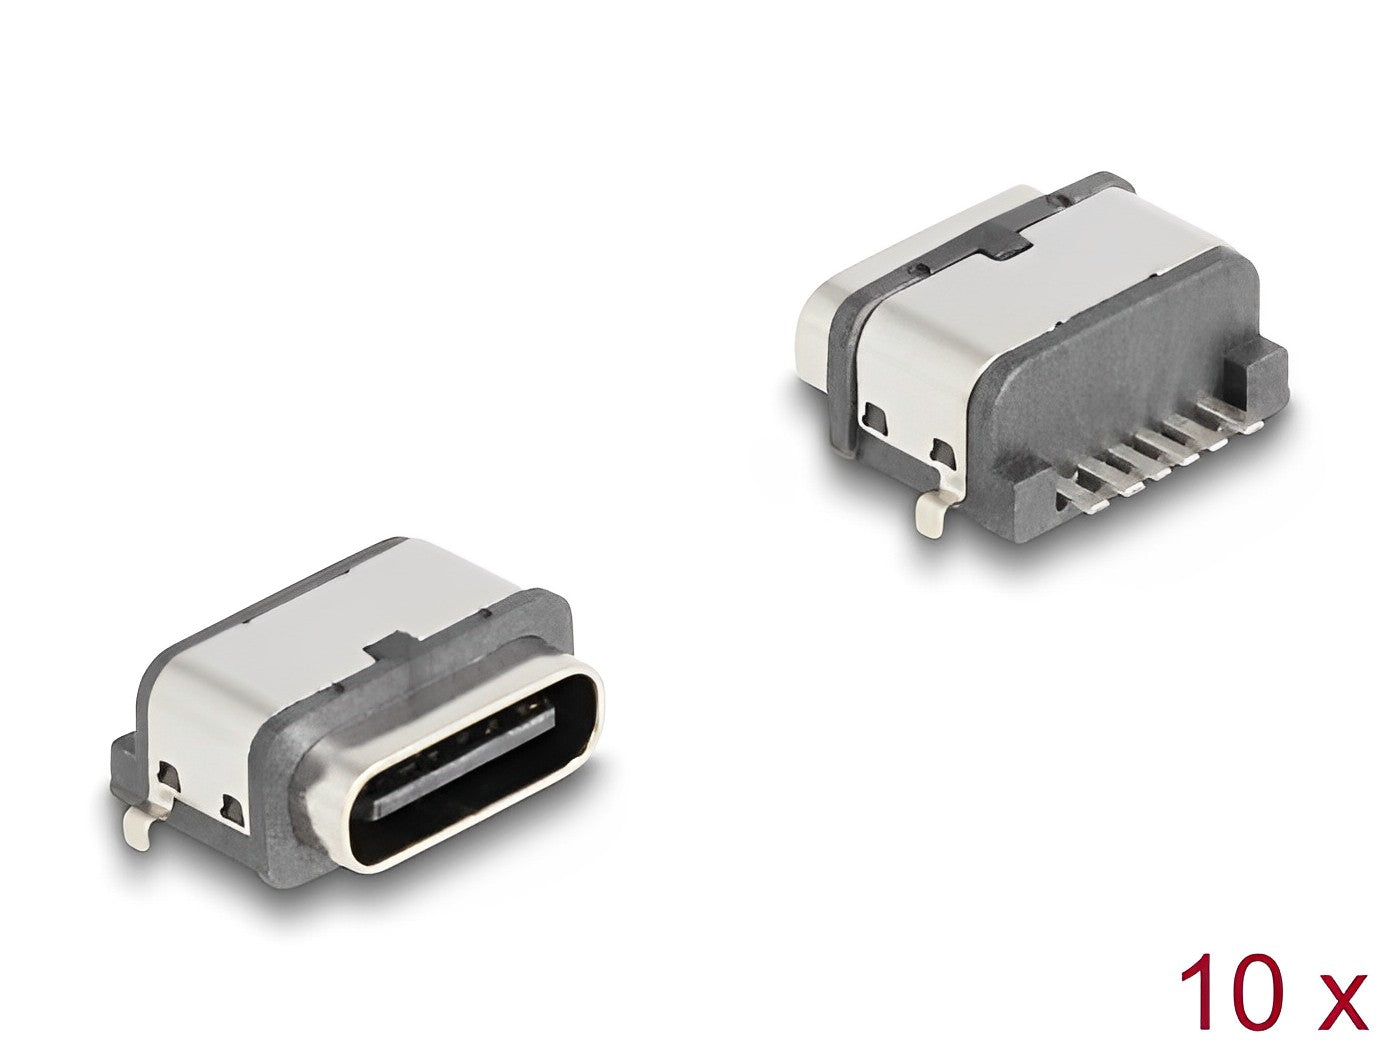 Delock USB 5 Gbps USB Type-C™ female 6 pin SMD connector with two metal tabs for solder mounting waterproof 10 pieces - delock.israel